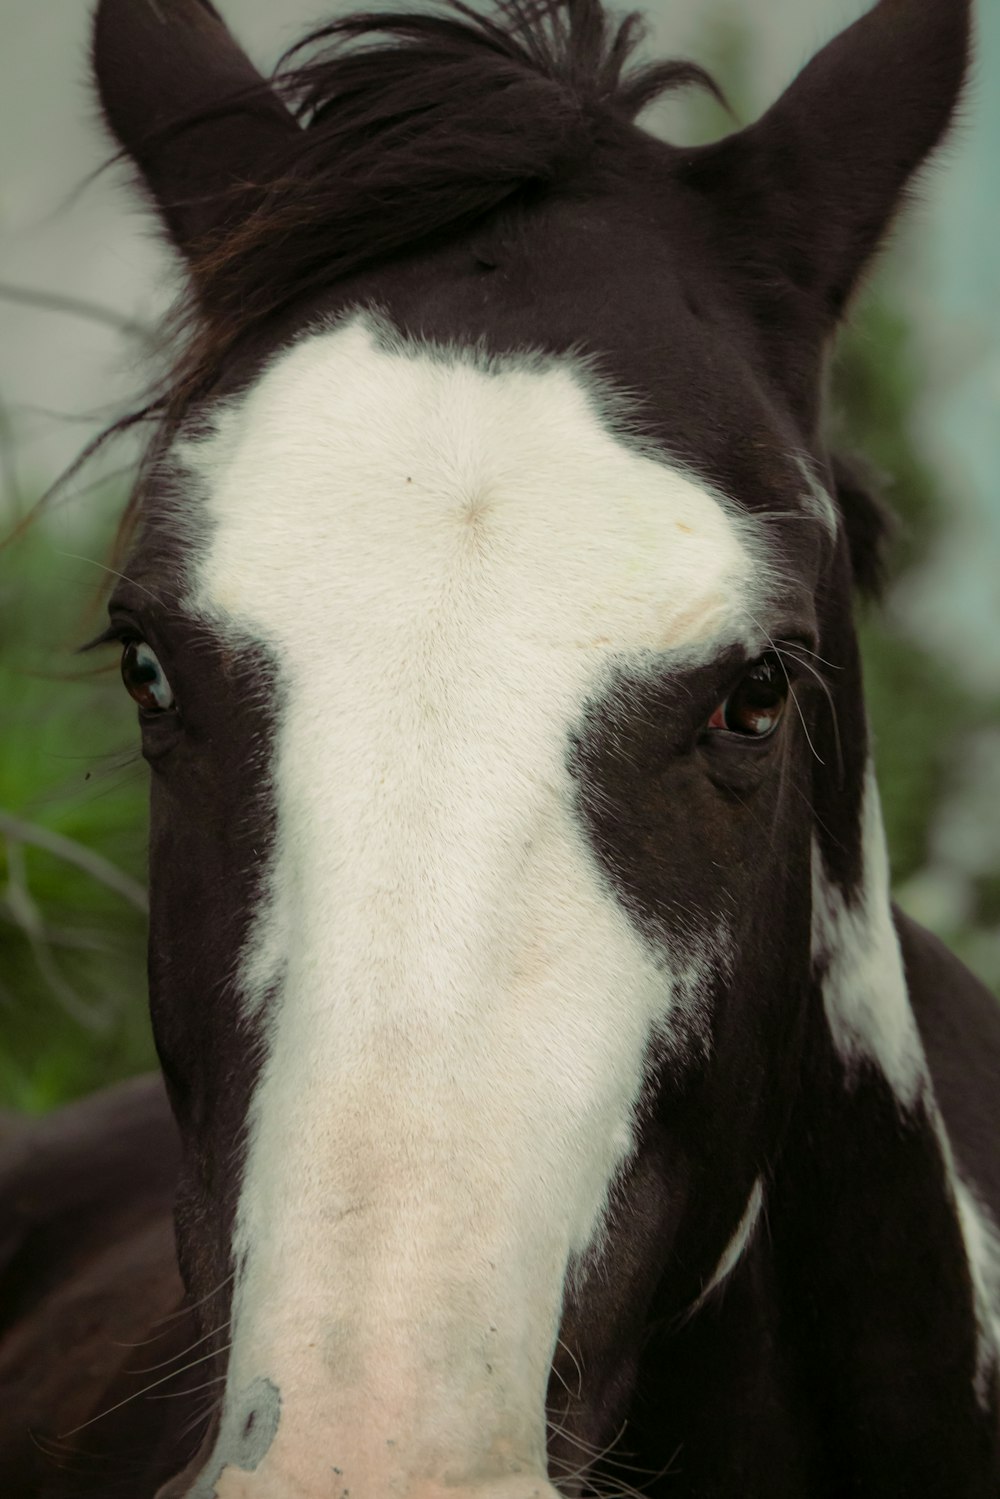 a close up of a black and white horse